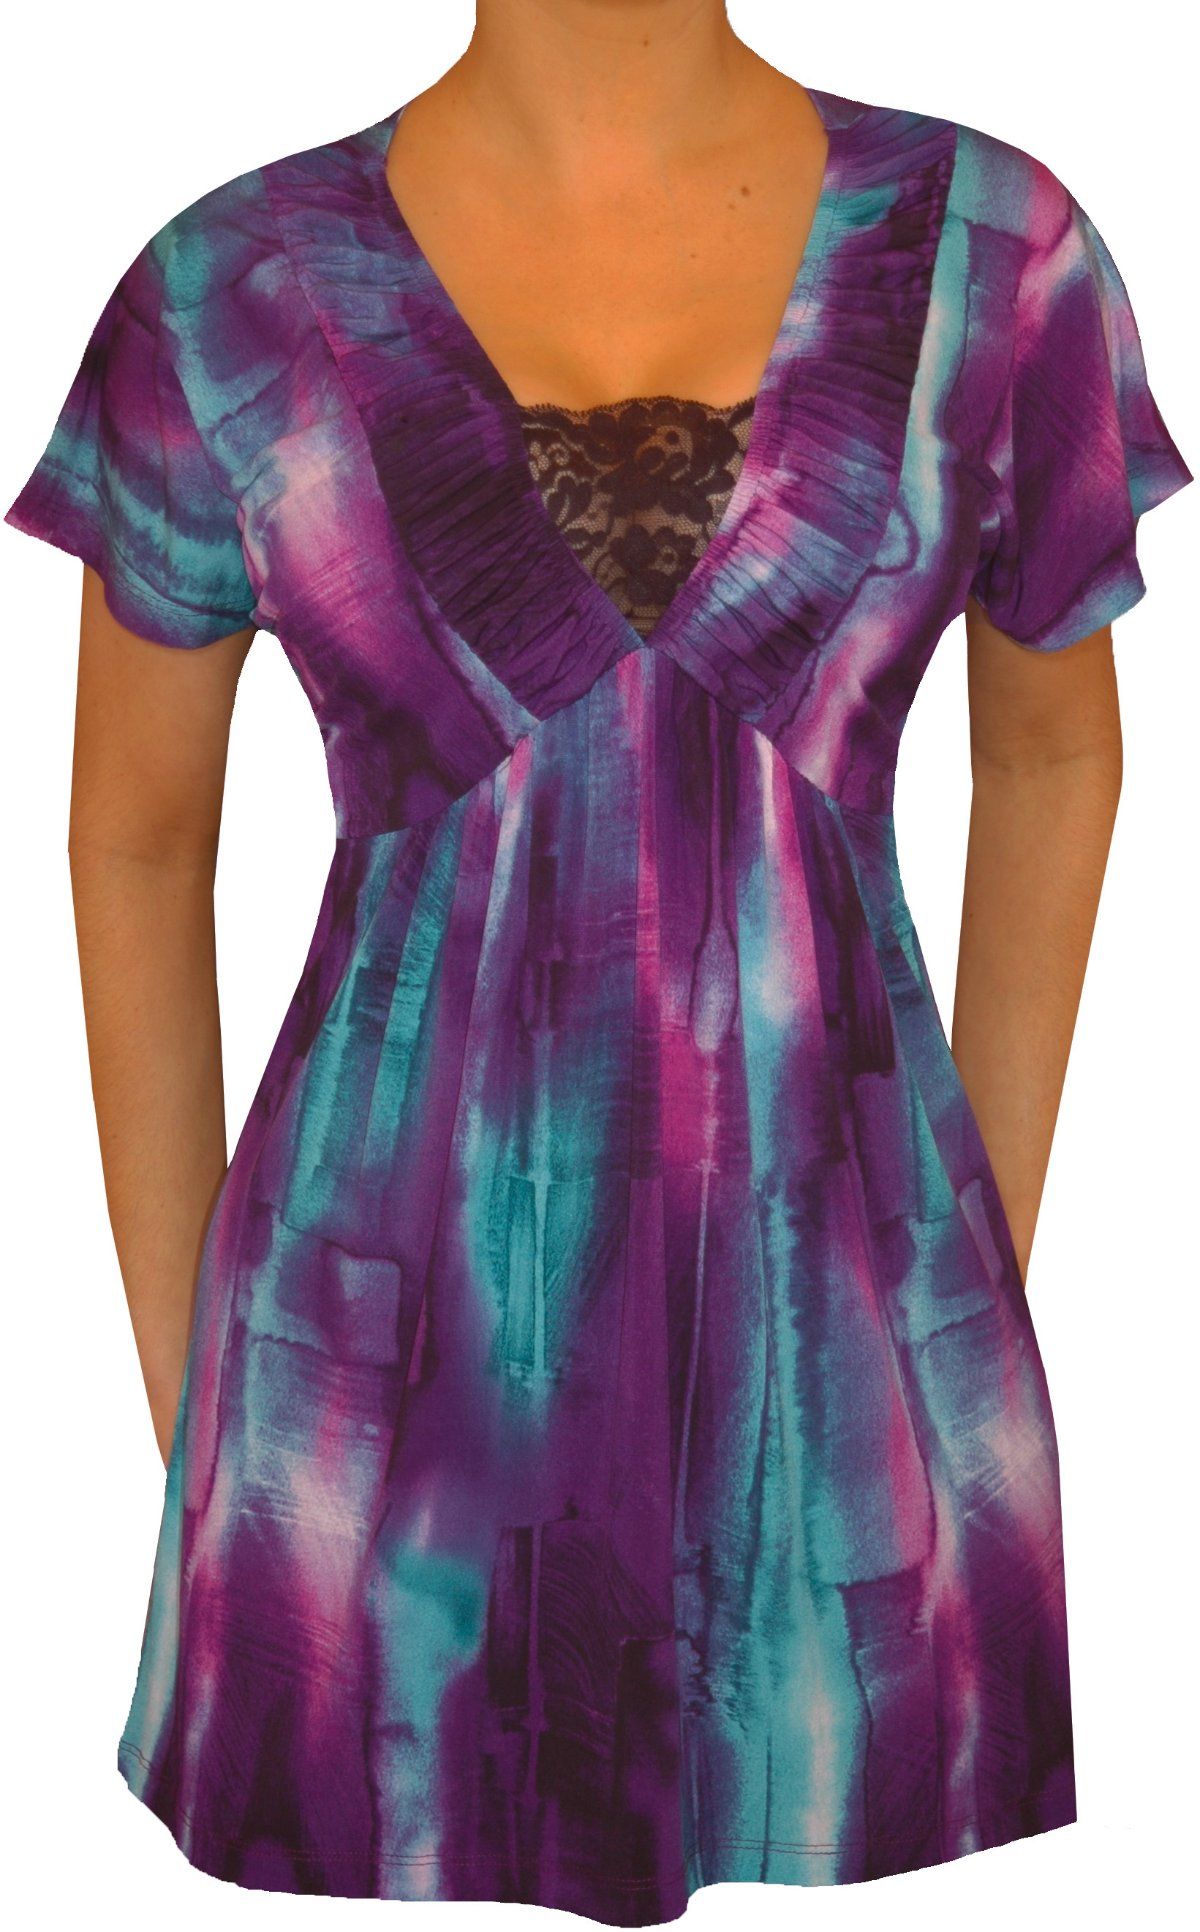 Plus purple blouses for women at walmart store from